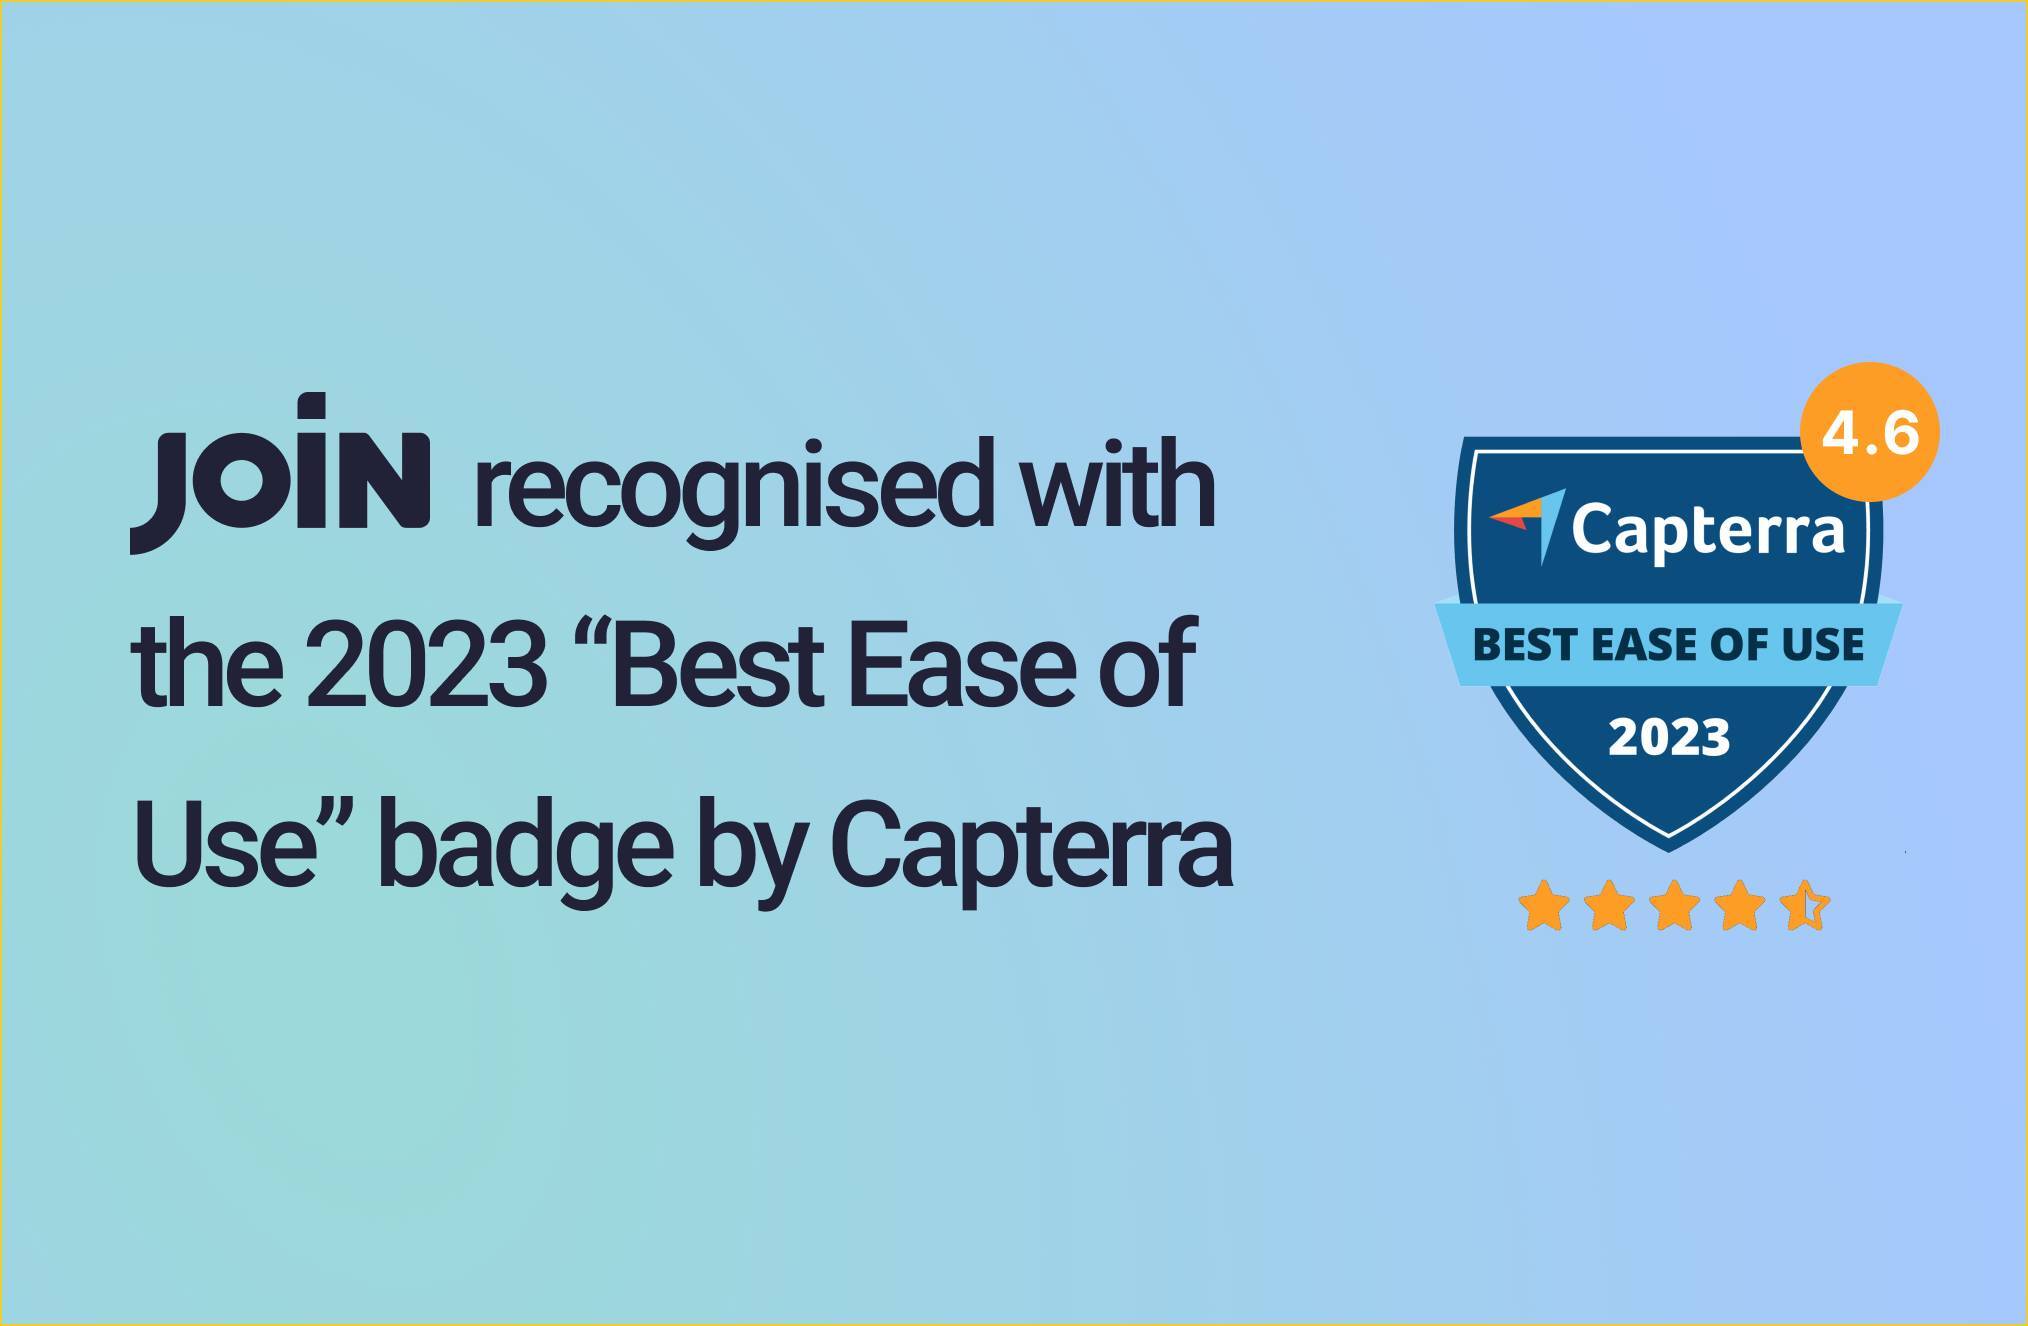 JOIN awarded the Best Ease of Use badge by Capterra!